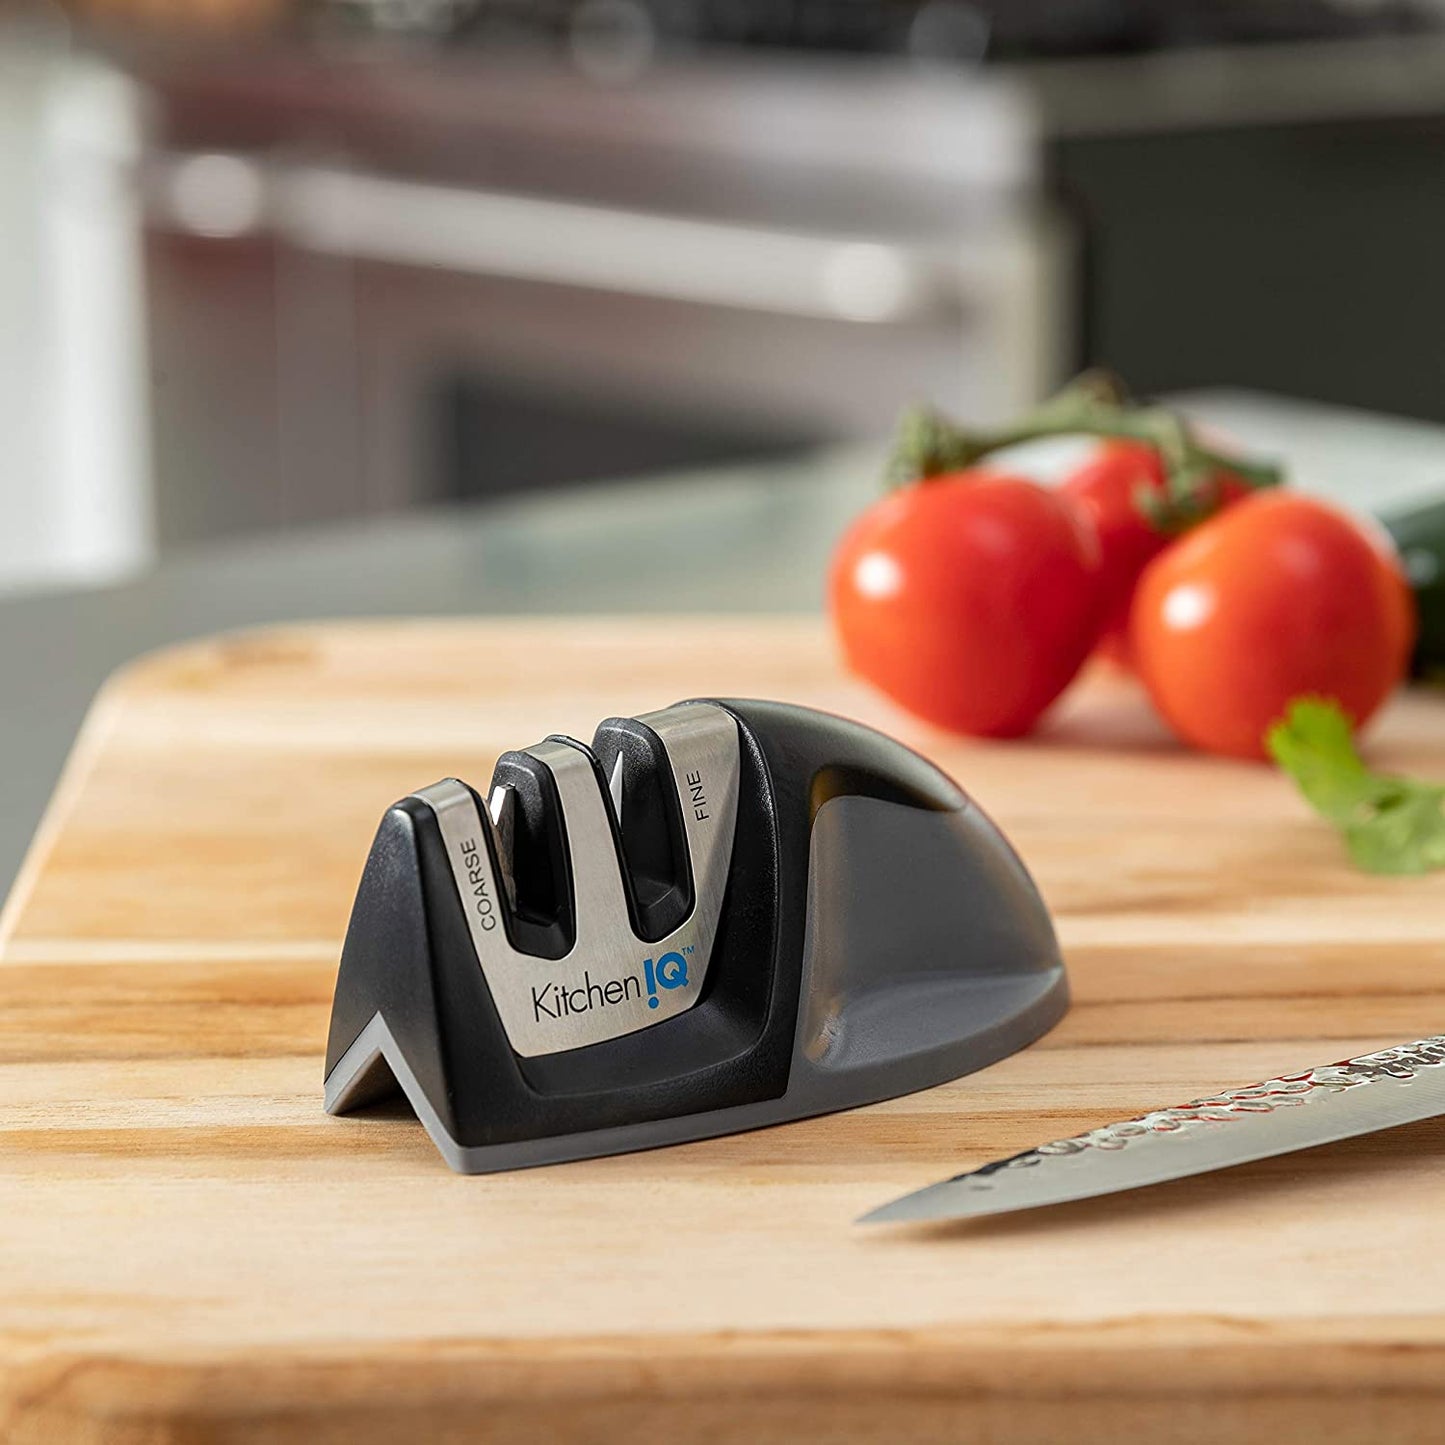 knife sharpener and knife on wood cutting board with tomatoes in background.